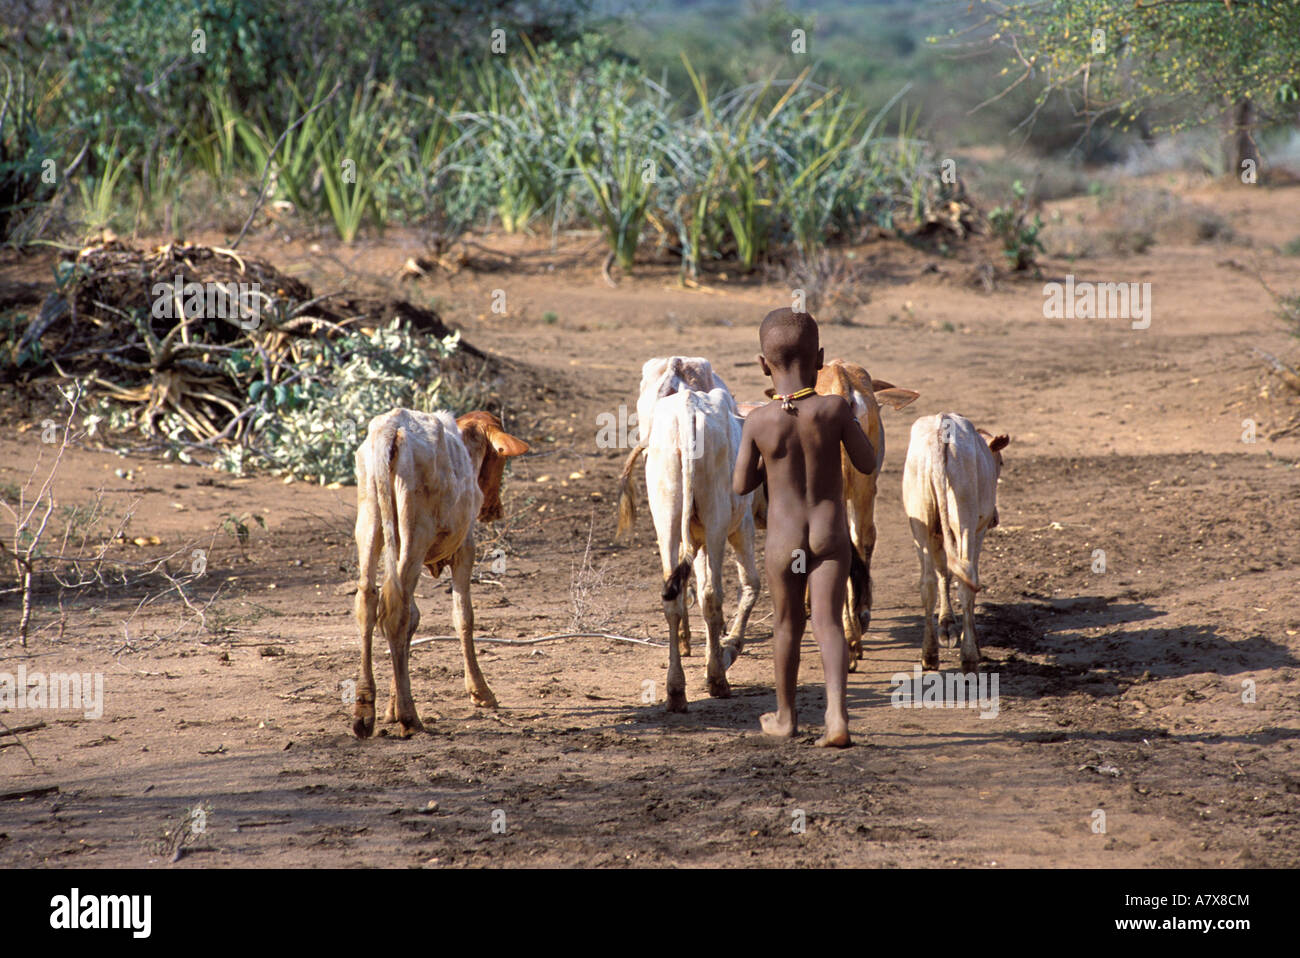 A small boy walks with some cattle to find water, near the Hamar village in Ethiopia's Omo River Region, Africa. Stock Photo